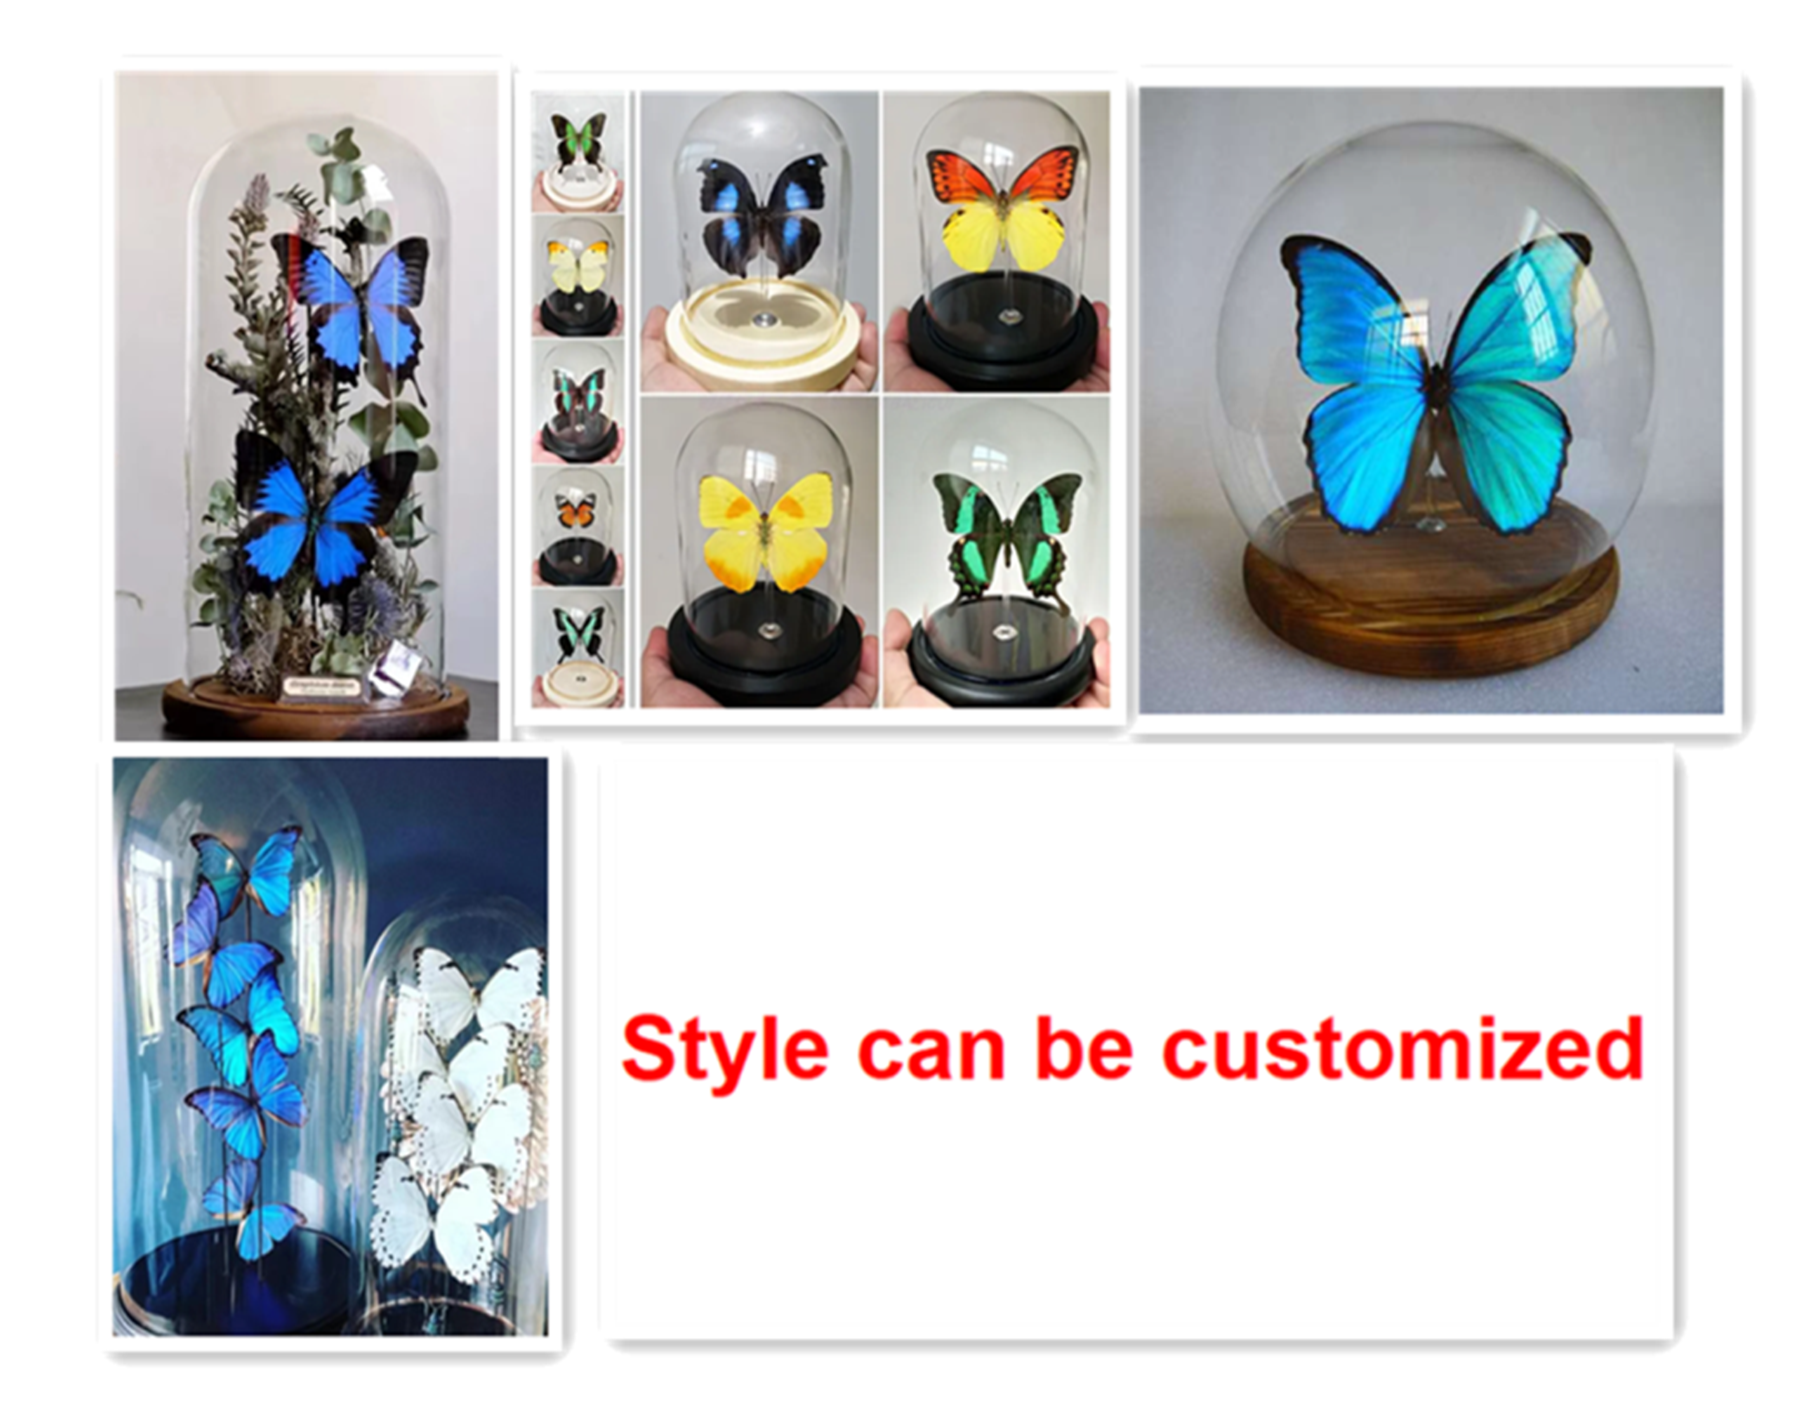 Morpho Helena Butterfly Suppliers & Wholesalers - CF Butterfly